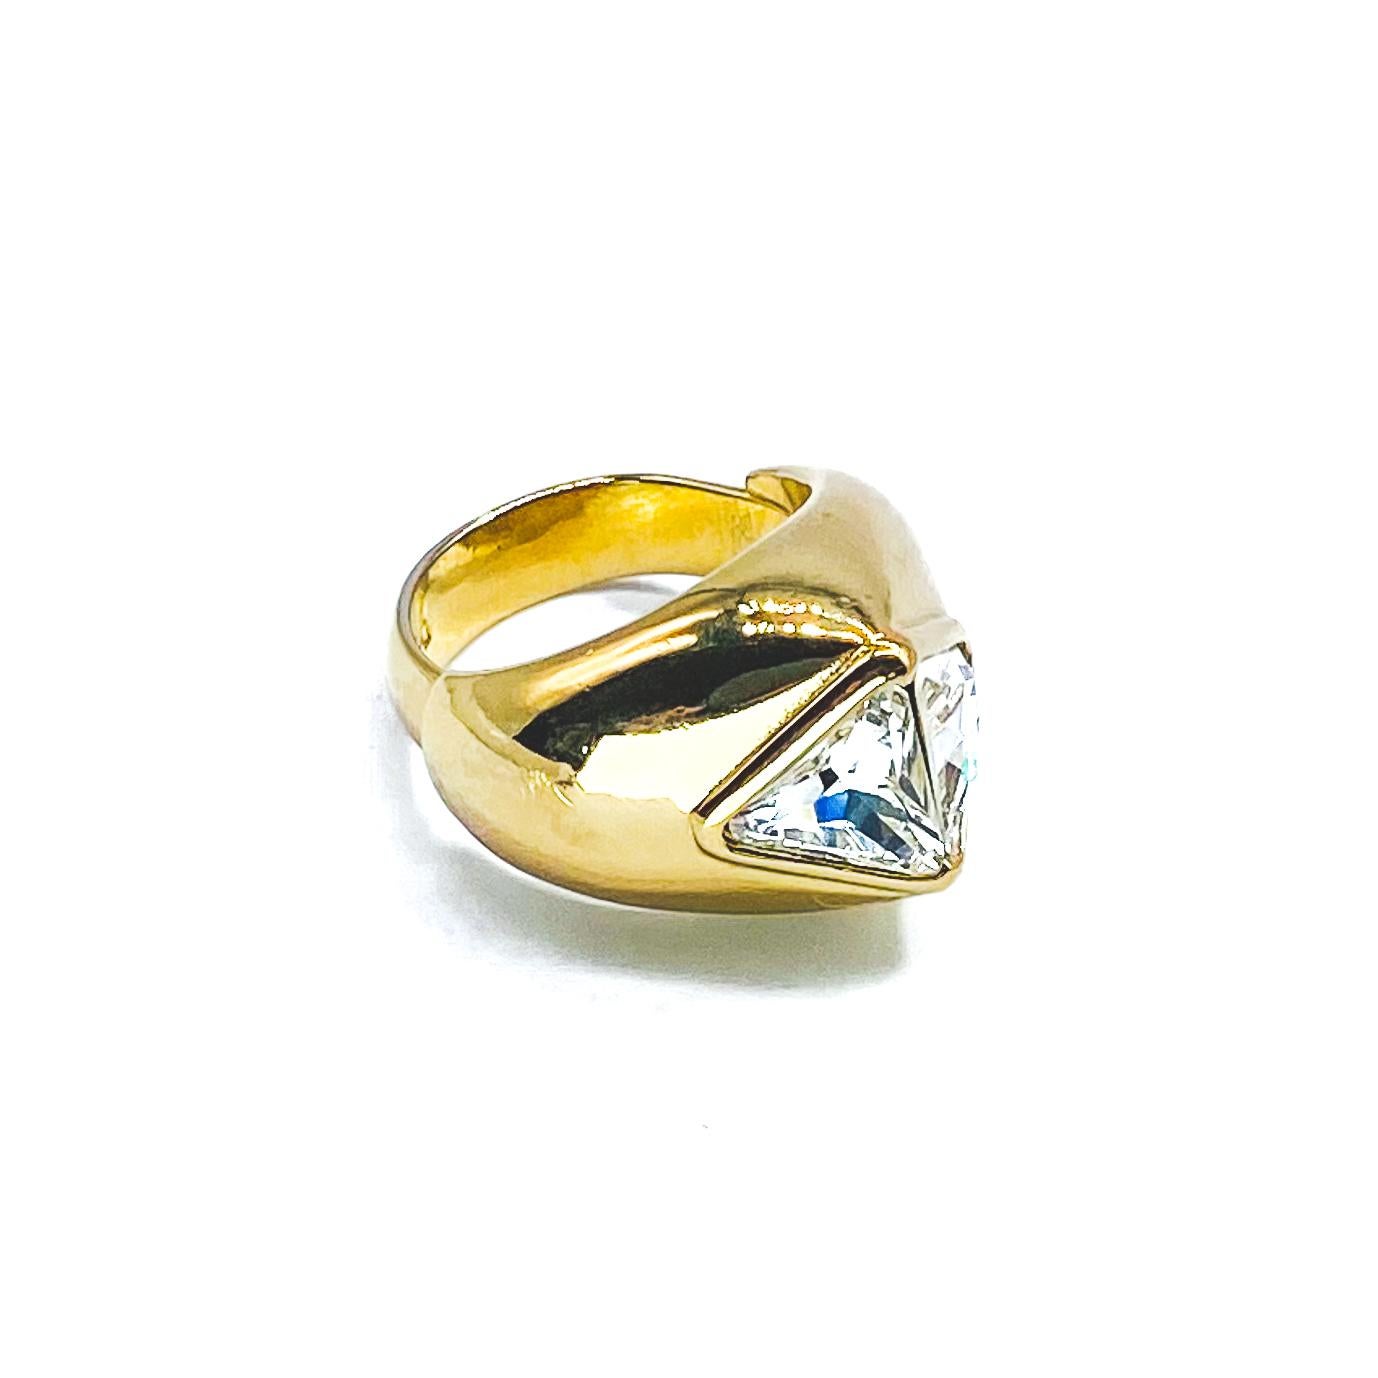 Christian Dior Statement 1980s Vintage Cocktail Ring

An incredible statement piece from the House of Dior, still on of the most coveted designers in the world. 

Detail
-Made in France in the late 1980s
-Crafted from high quality gold plated